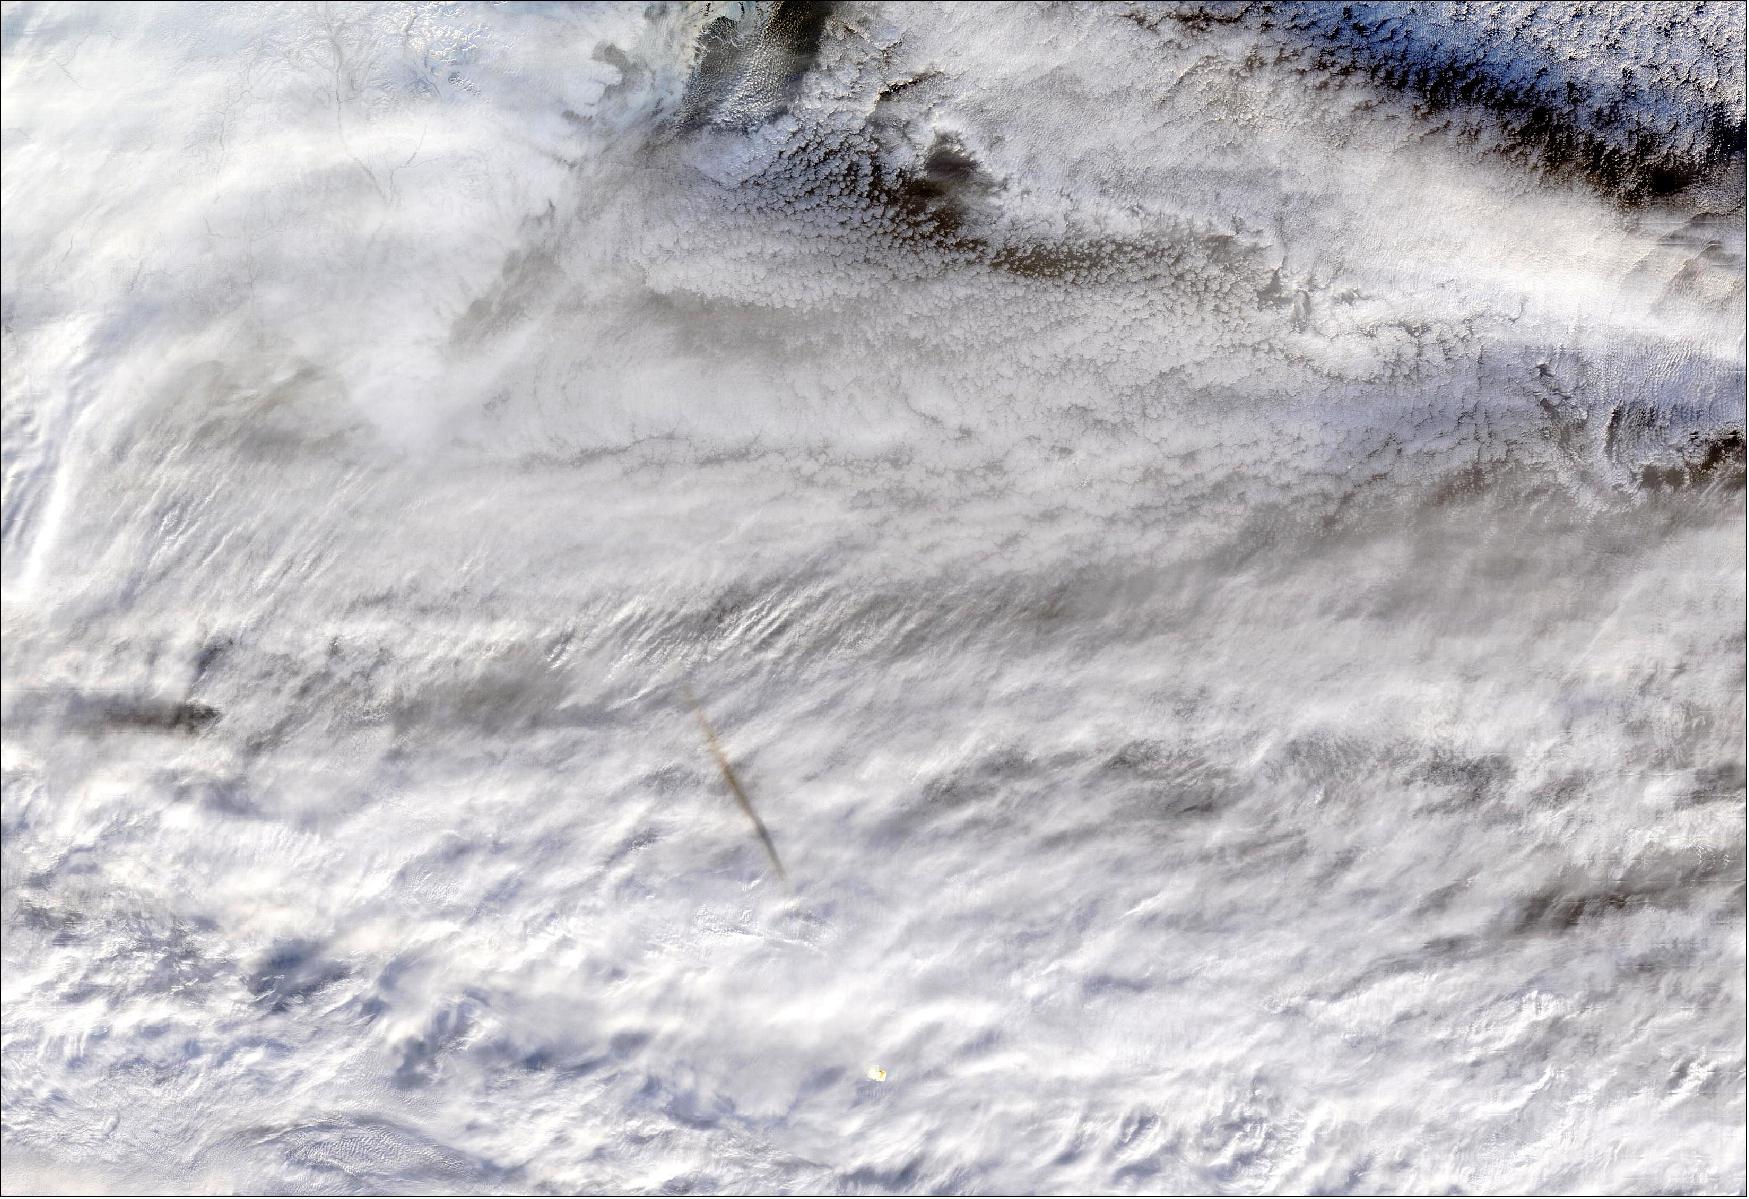 Figure 44: The MODIS instrument captured this true-color image showing the remnants of a meteor's passage, seen as a dark shadow cast on thick, white clouds on Dec. 18, 2018. MODIS captured the image at 23:50 UTC (image credit: NASA/GSFC)